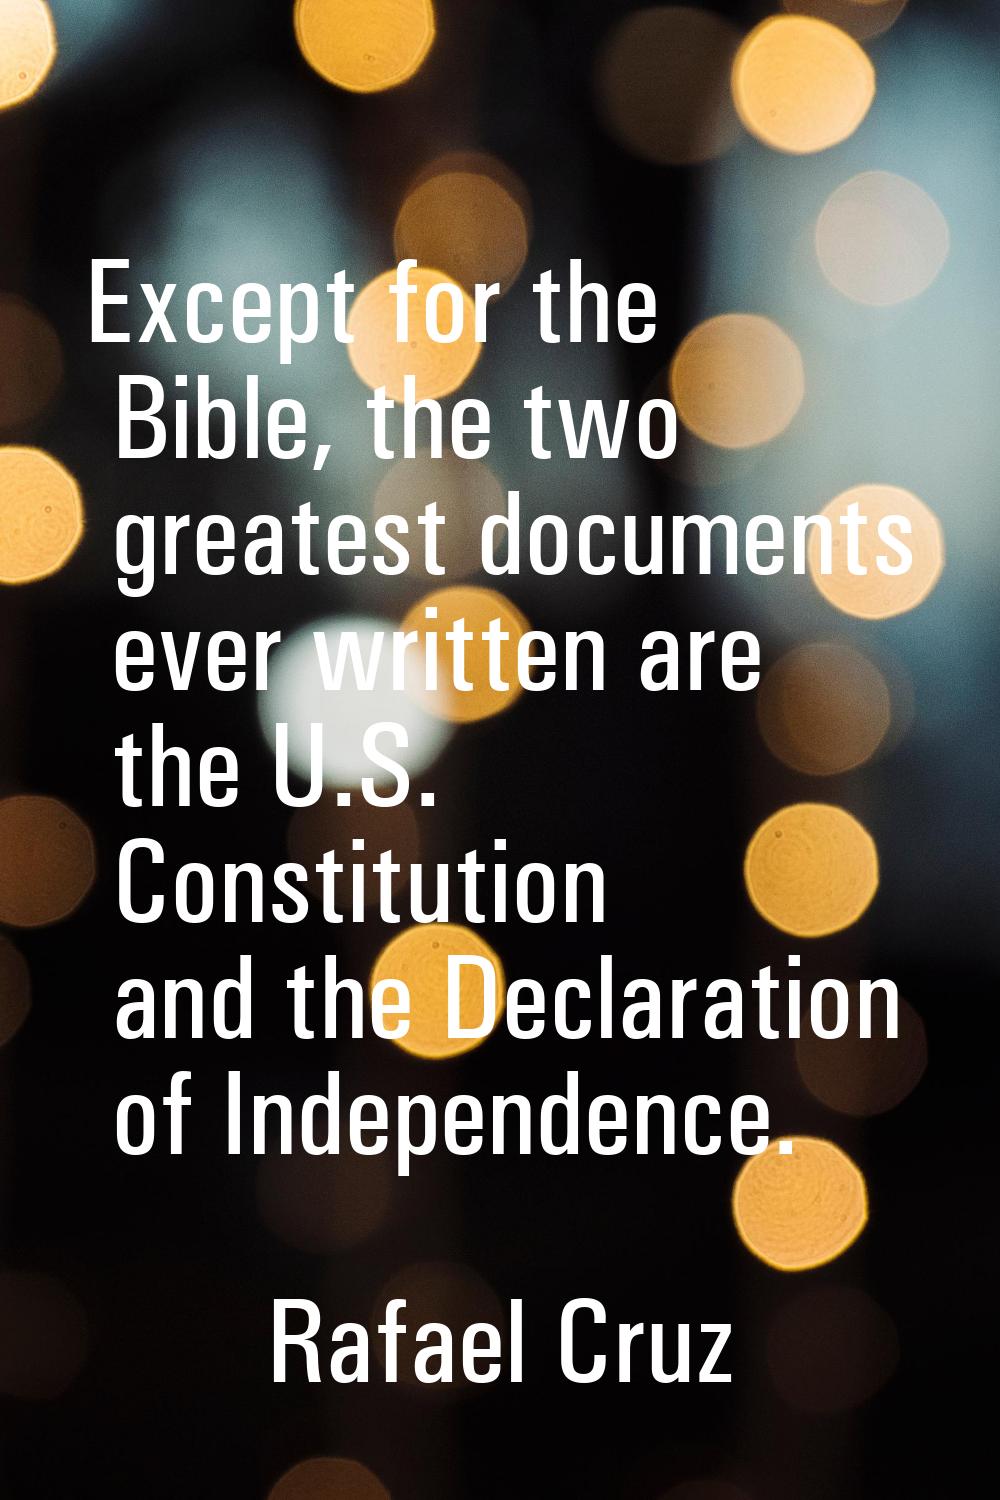 Except for the Bible, the two greatest documents ever written are the U.S. Constitution and the Dec